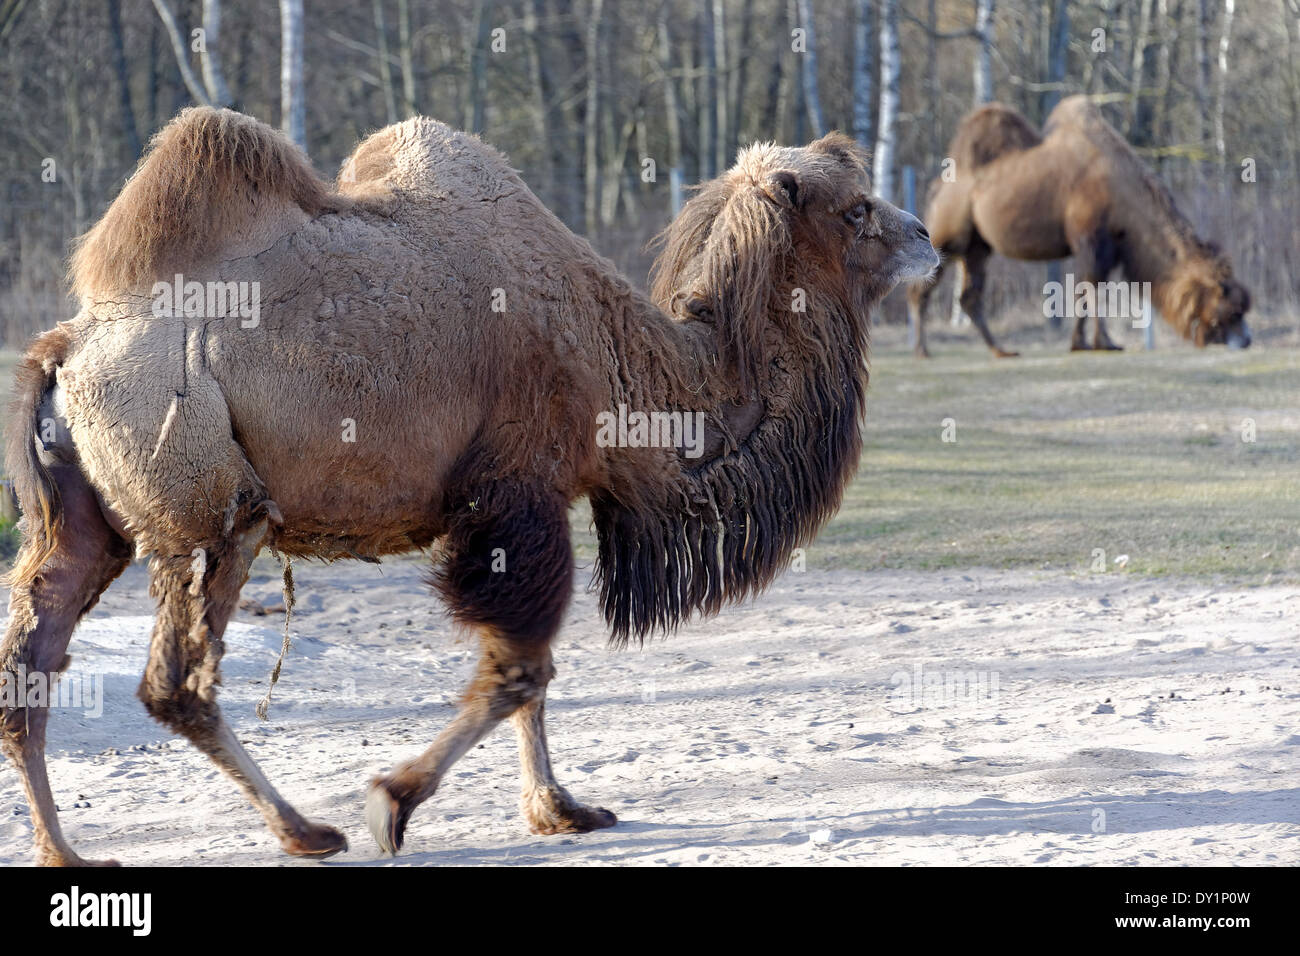 actrian camel (Camelus bactrianus) is a large, even-toed ungulate native to the steppes of Central Asia. Stock Photo